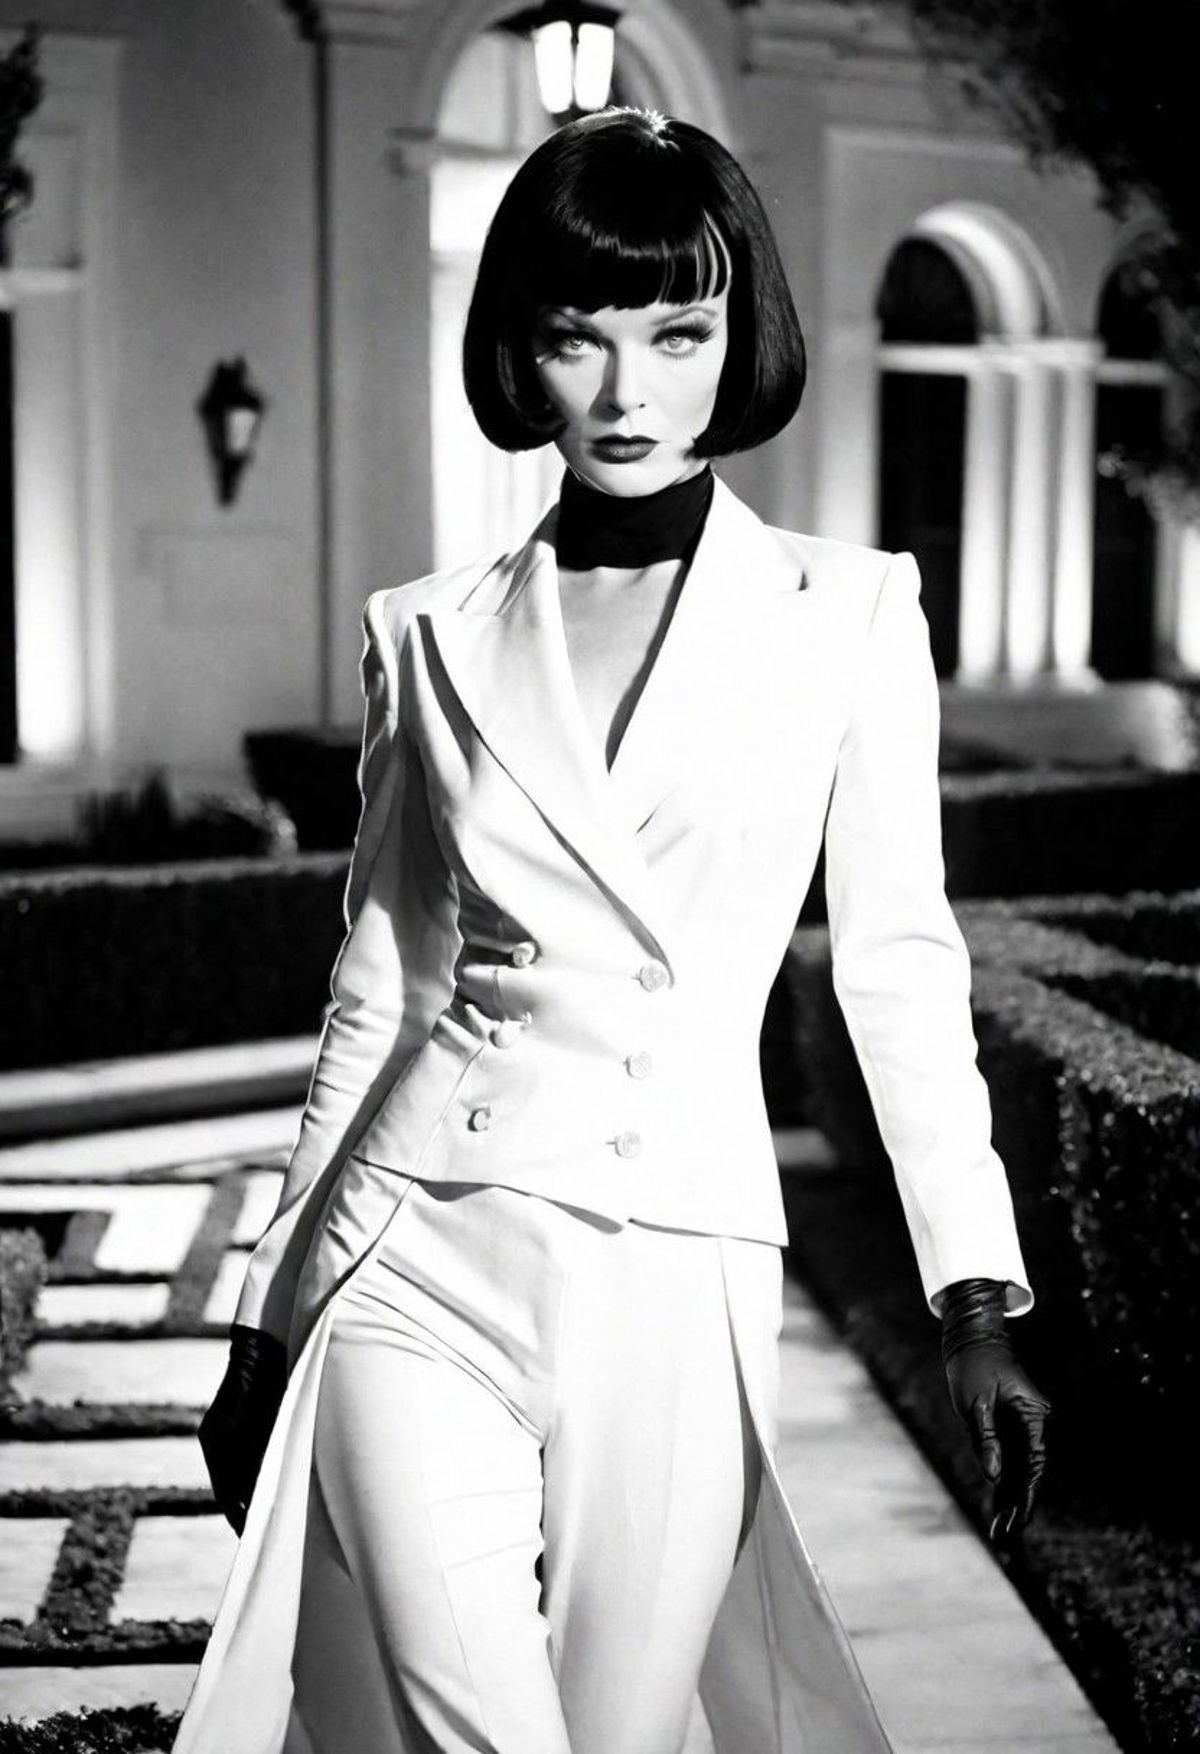 A woman wearing a white suit and black gloves, standing on a patio.